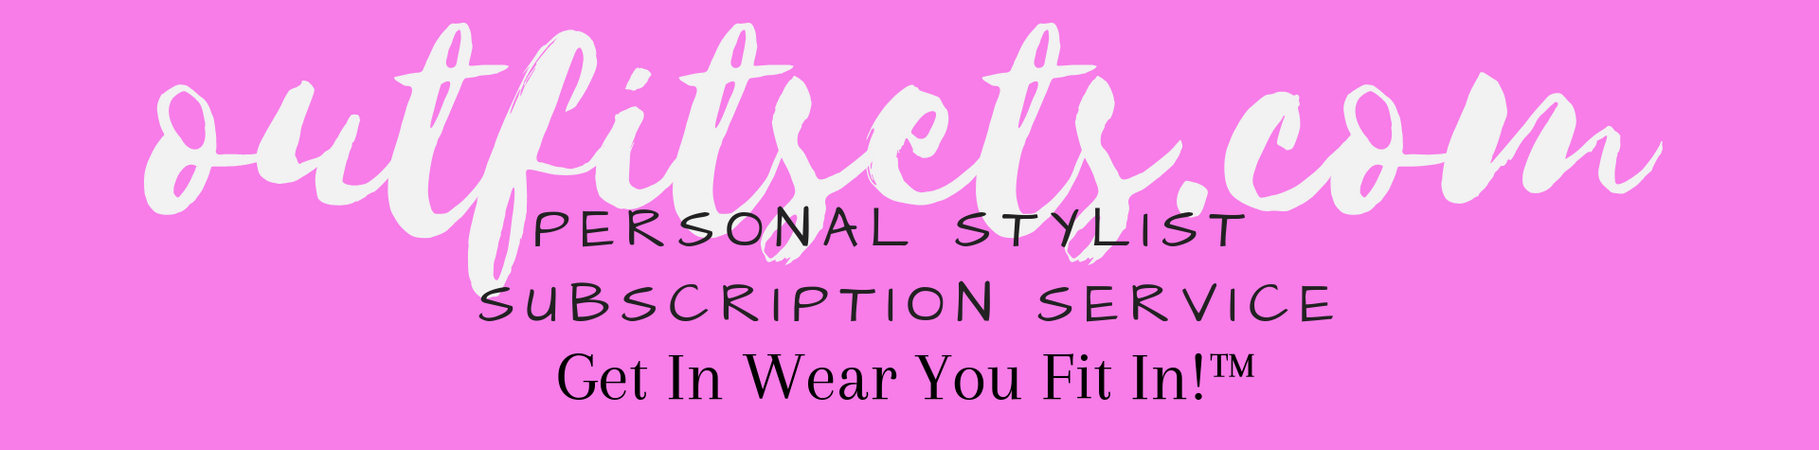 Dressed by OutfitSets.com – Outfit Set Ideas and Personal Stylist Service